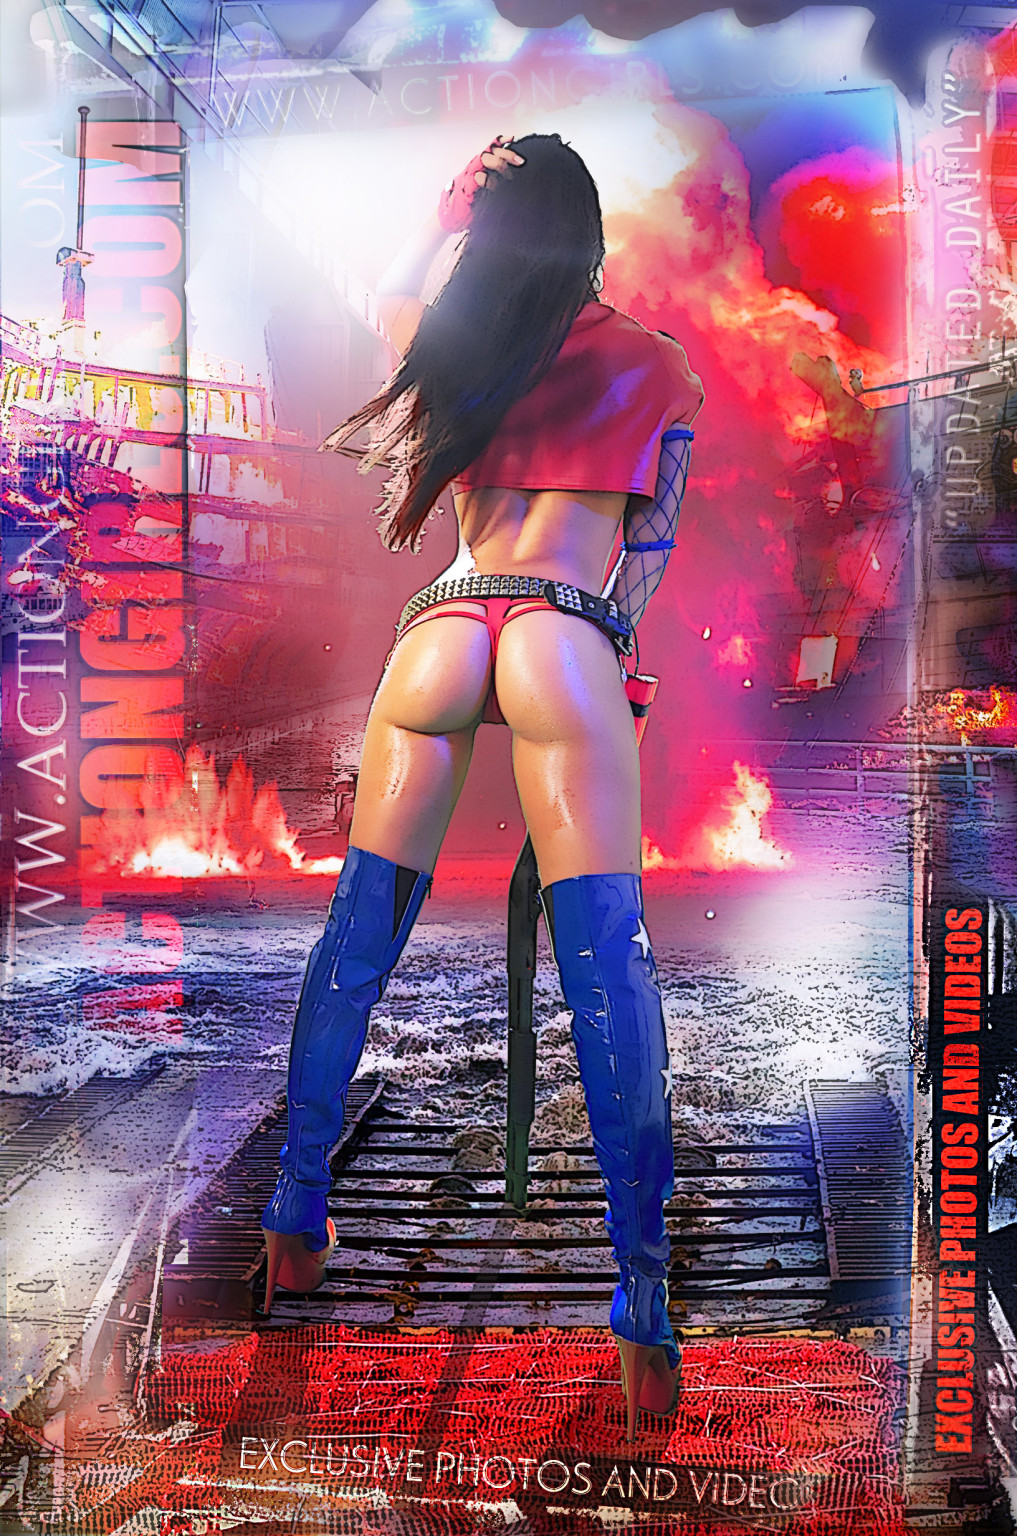 Exclusive Actiongirls Web Posters Deluxe Photos Actiongirls #70898367